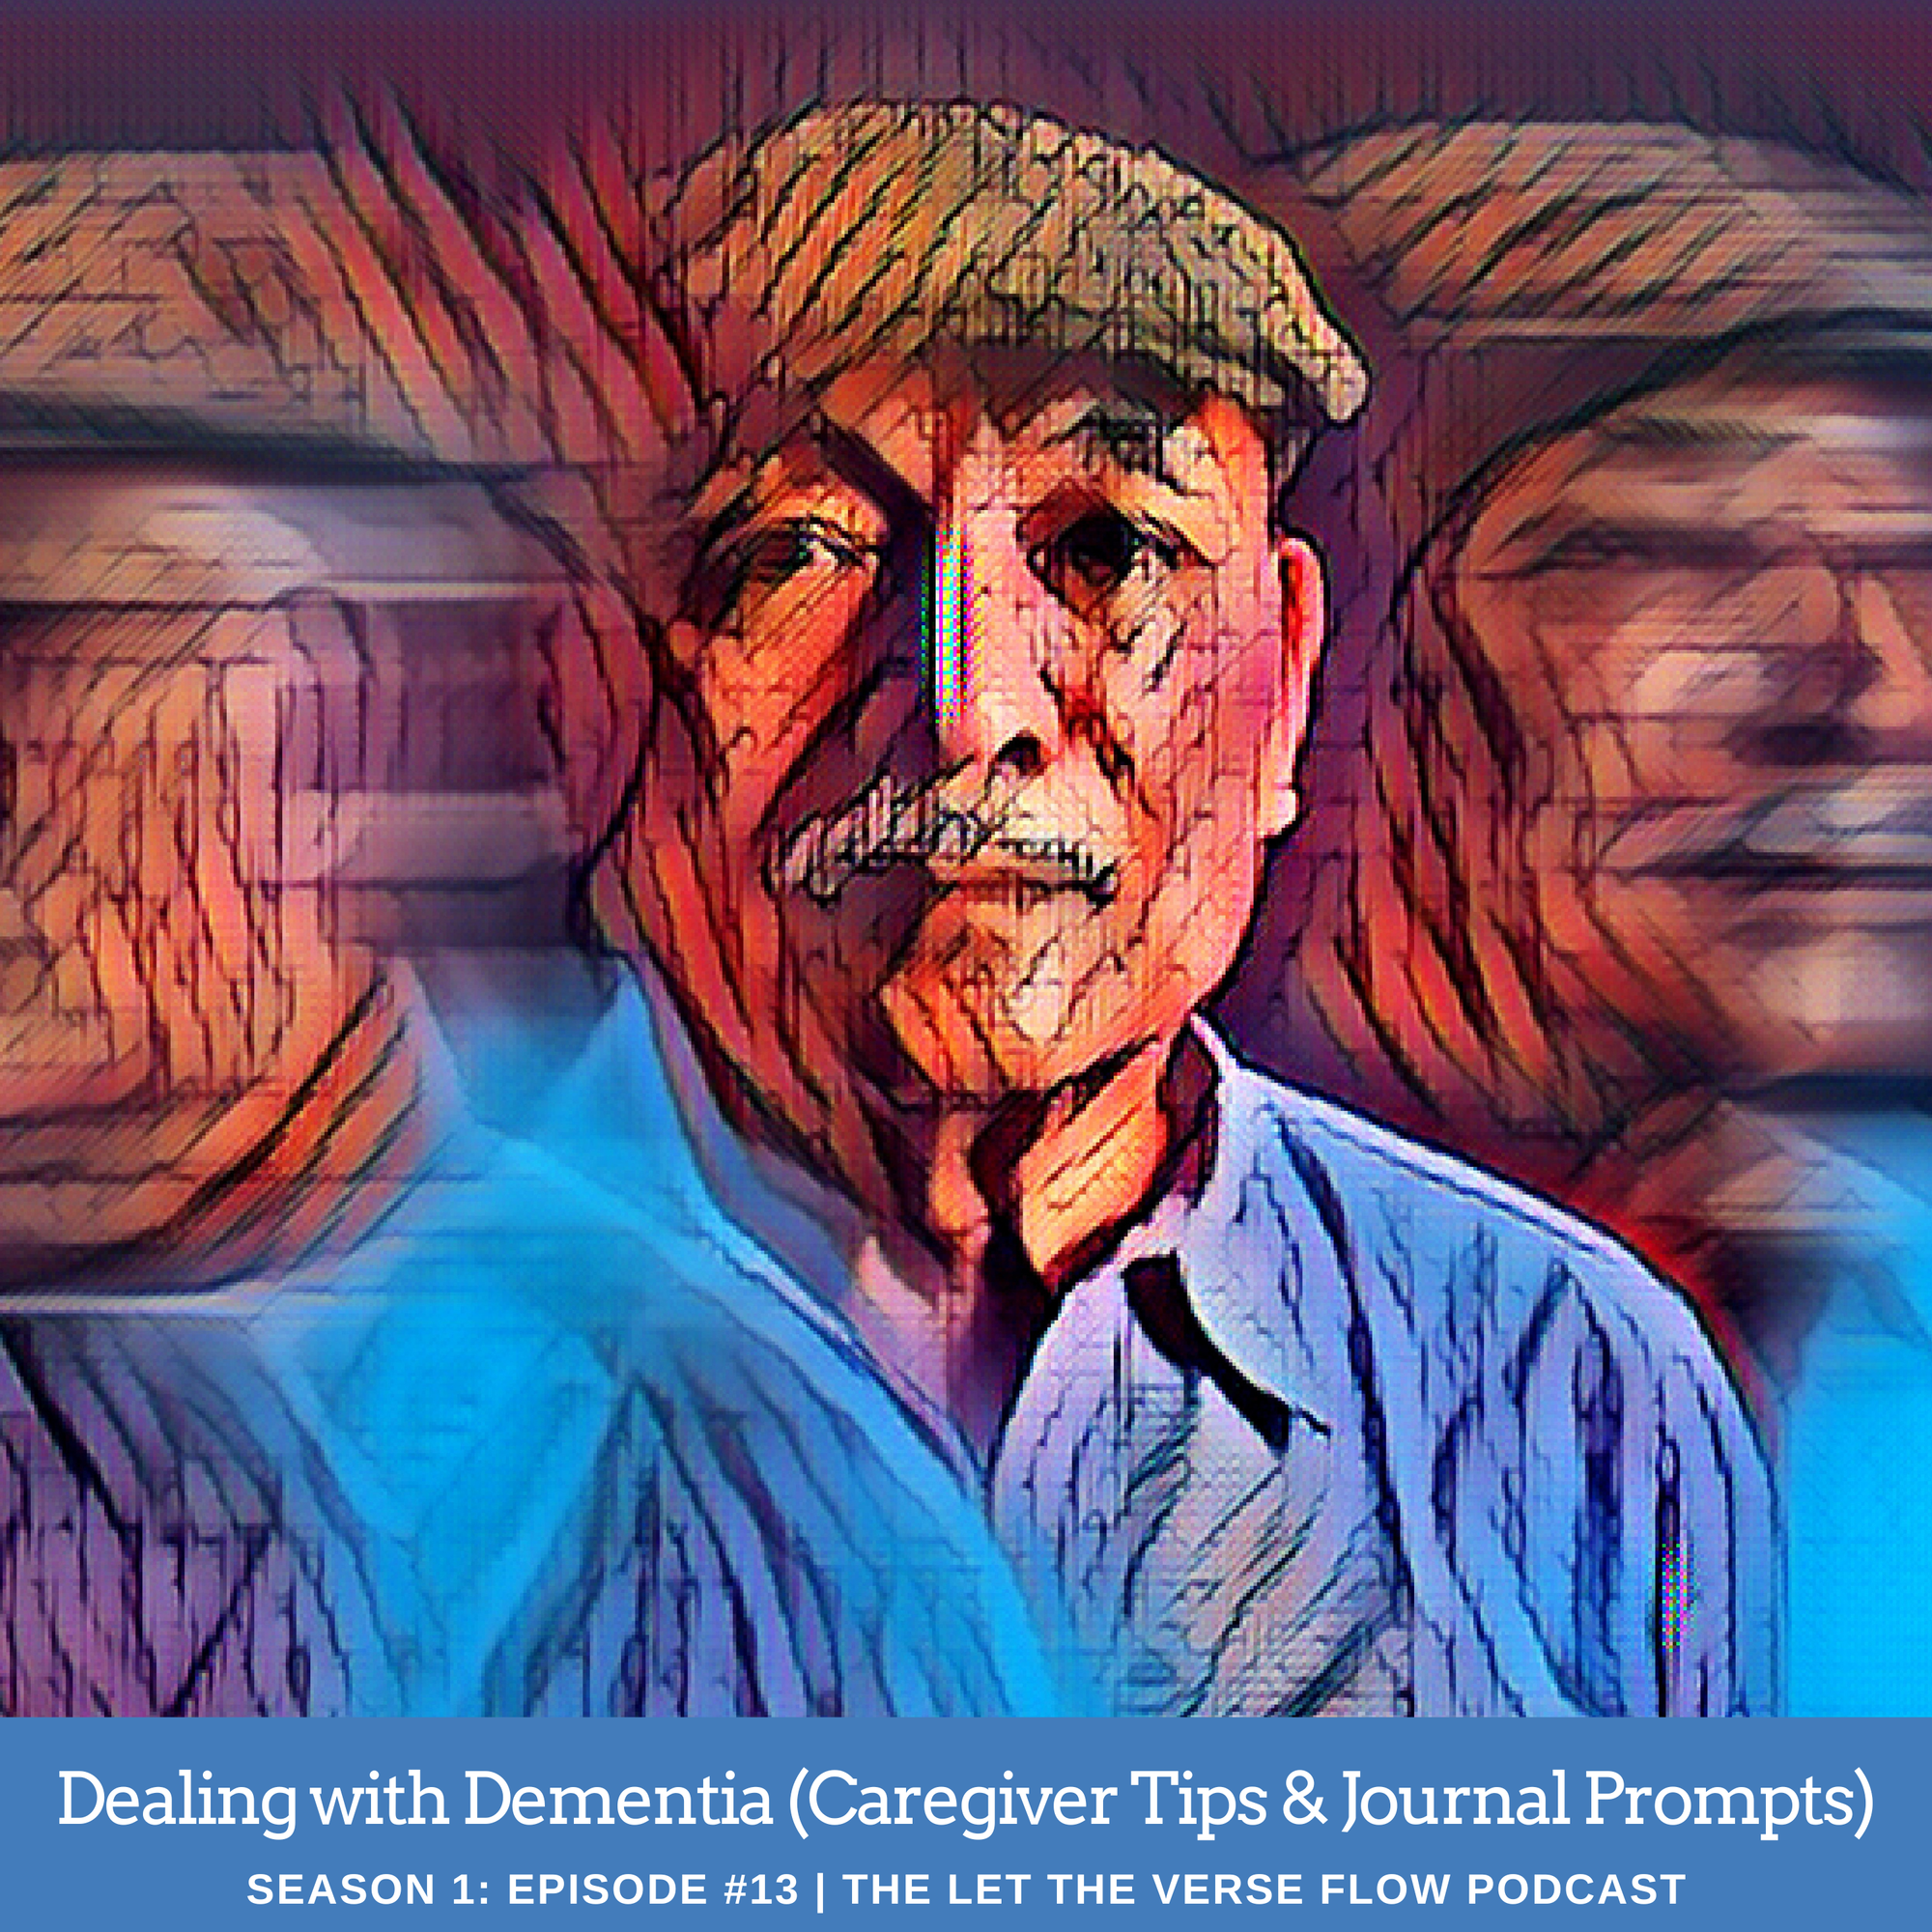 Painter filter on a photo of an elderly man with blurred images of his face in the background suggesting movement; caption reads: Dealing with Dementia Season 1 episode 13